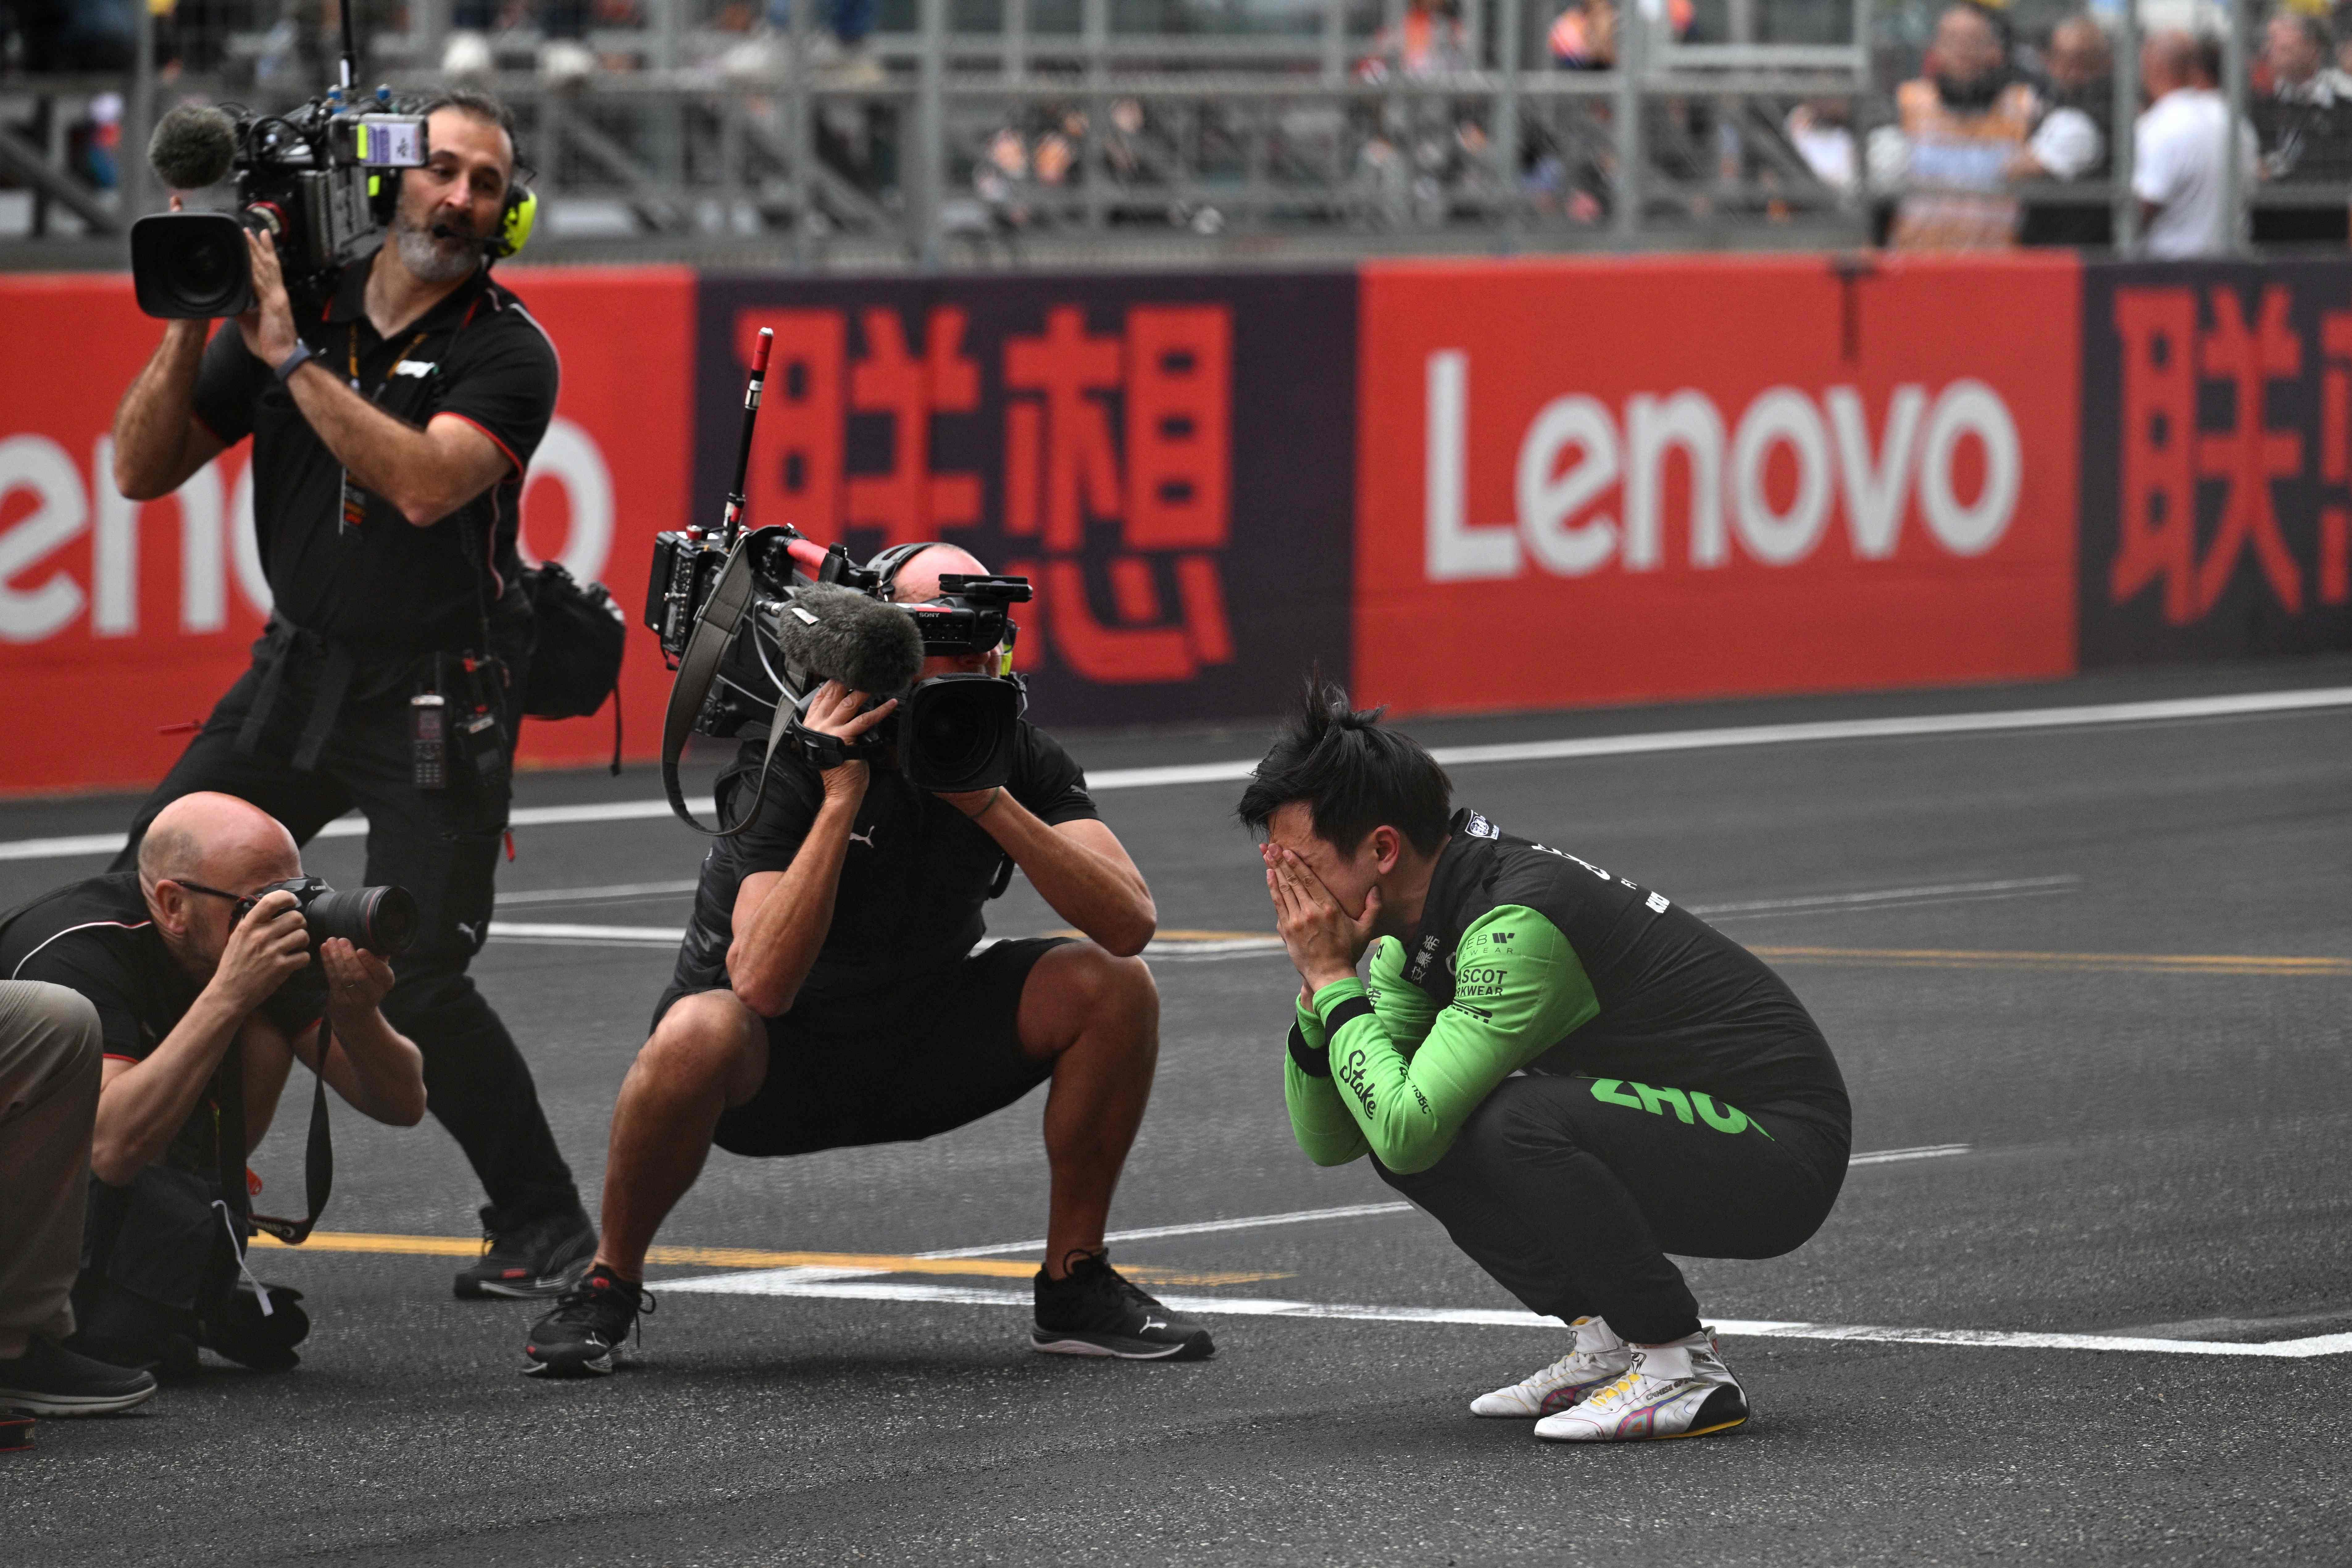 Chinese race fans, and Zhou Guanyu, have come a long way in Formula One